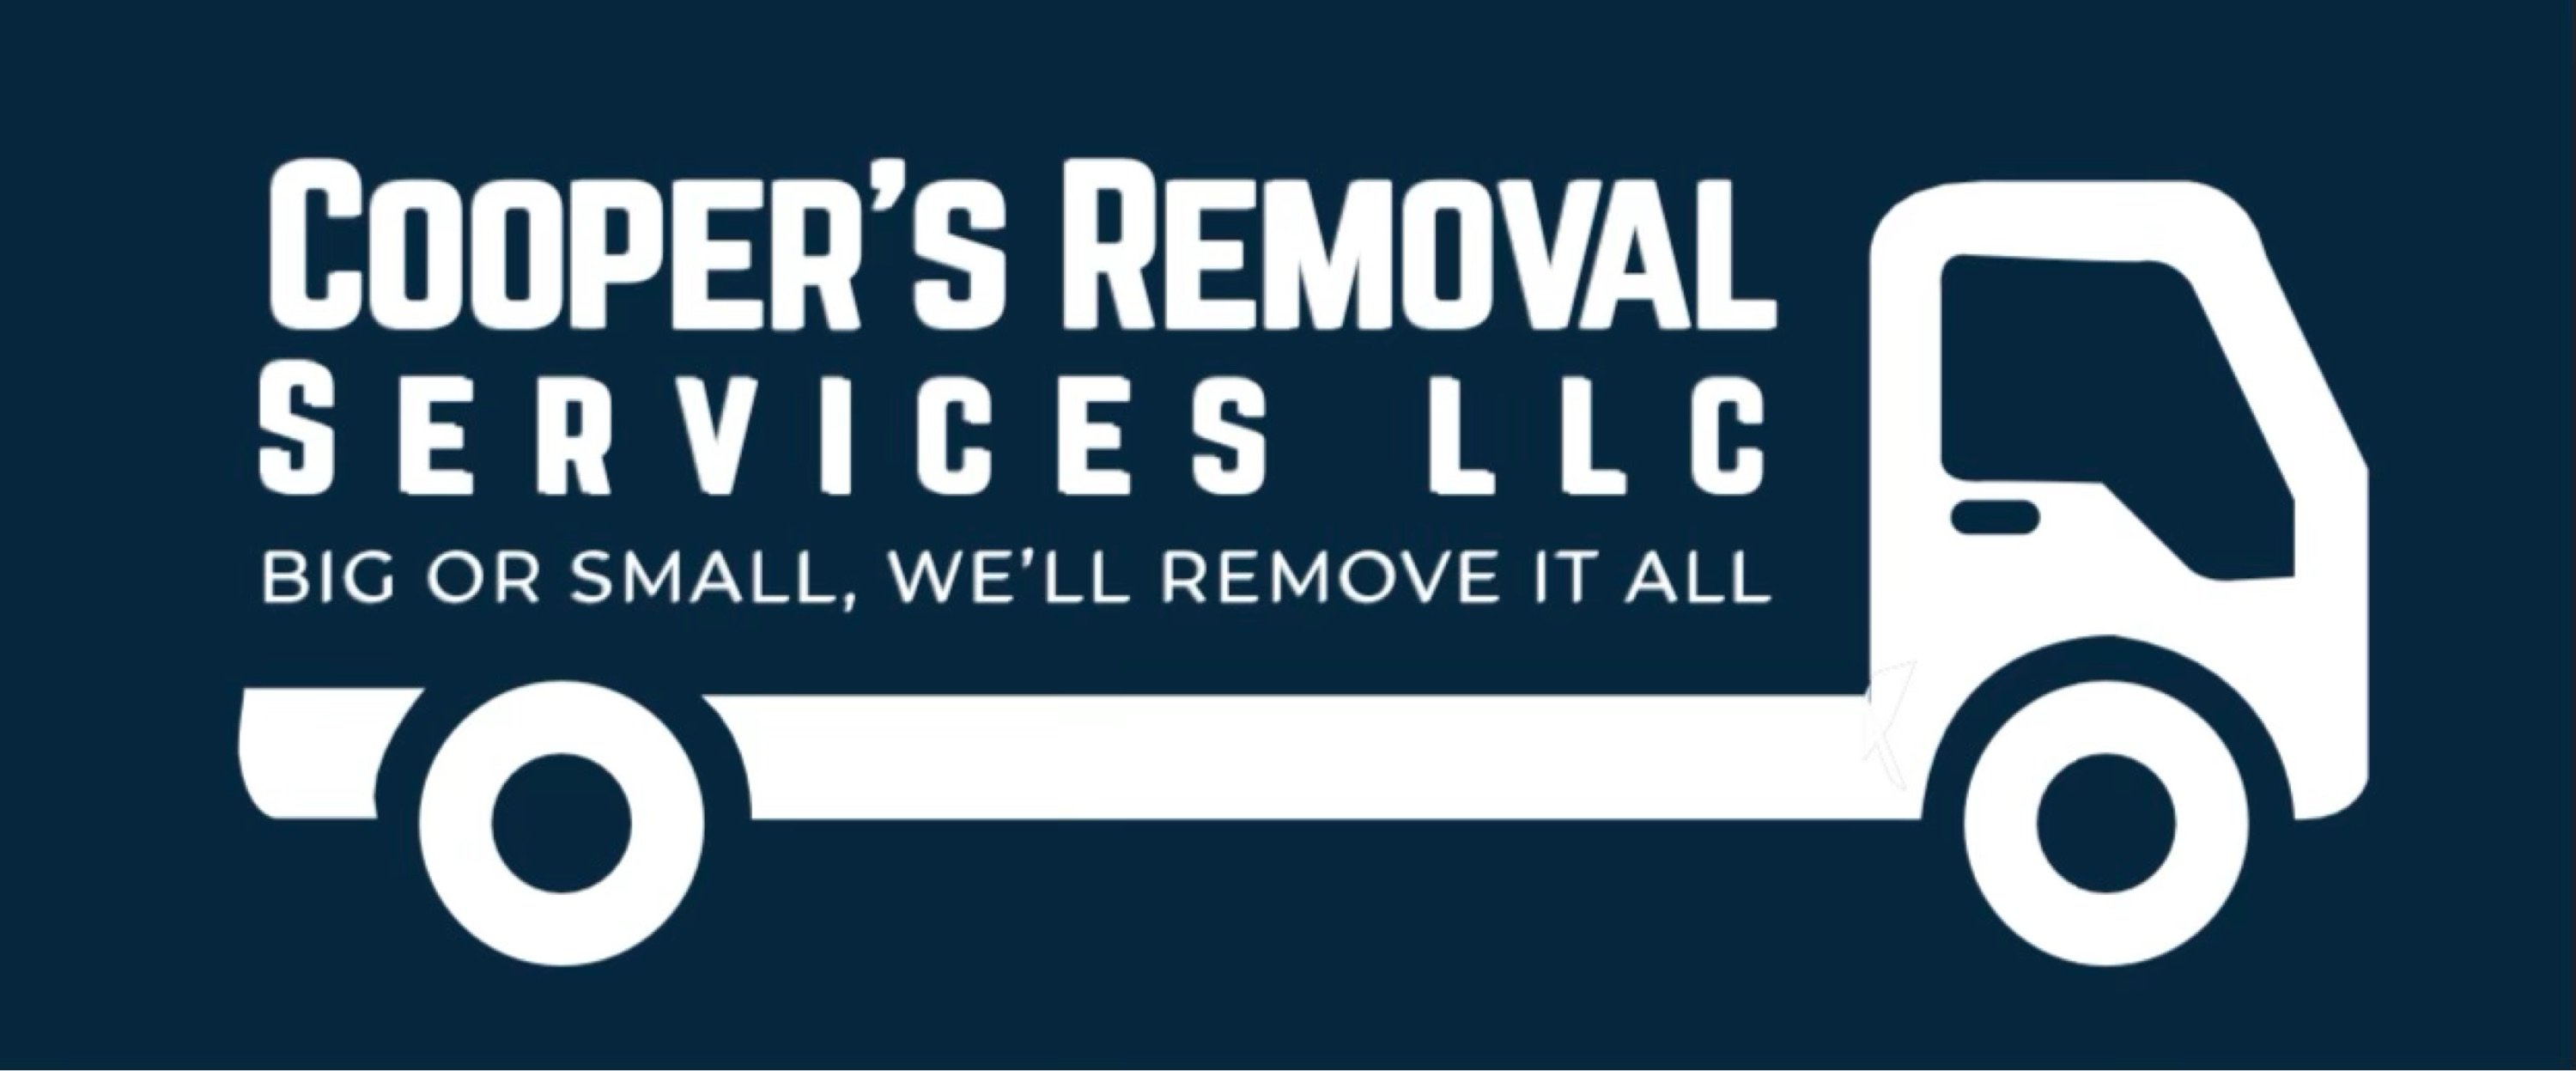 Cooper's Removal Services, LLC. Logo